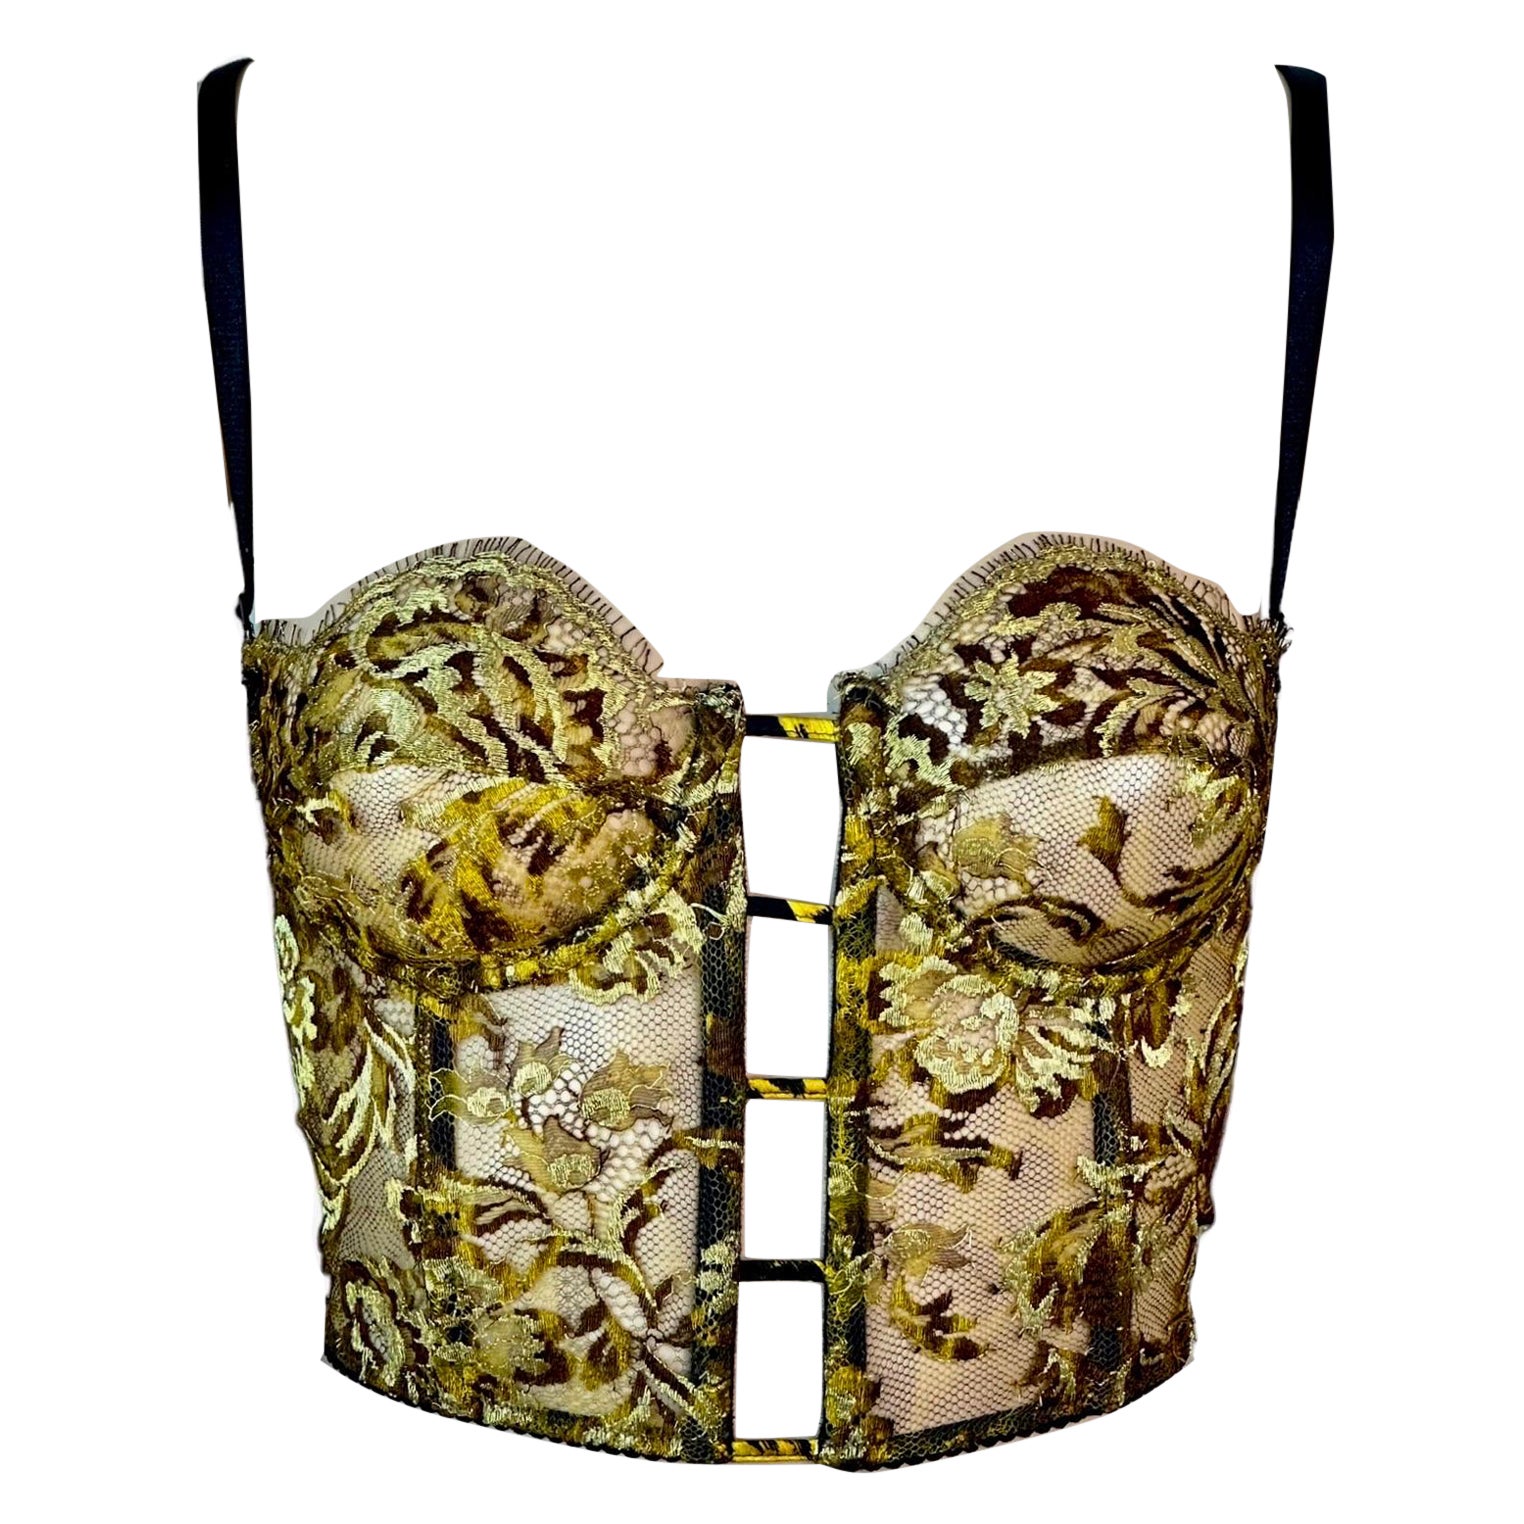 Gianni Versace S/S 1992 Unworn Sheer Gold Embroidered Lace Bustier Bra Crop Top  For Sale